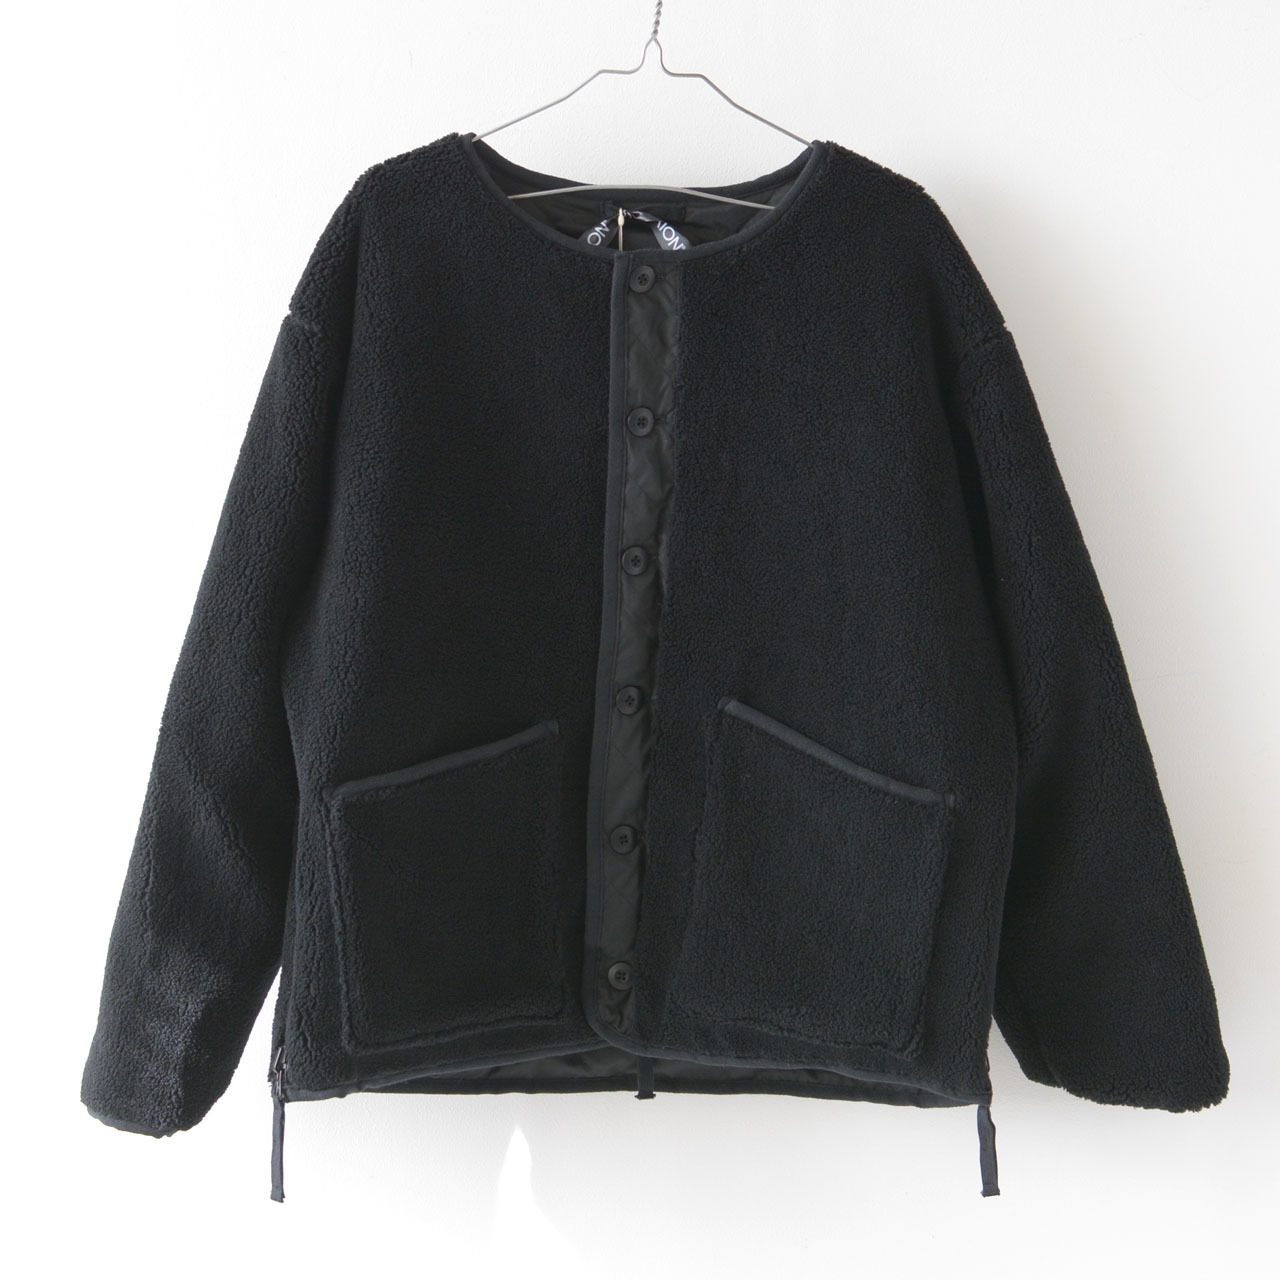 TAION [タイオン] MILITARY RIVERSIBLE CREW NECK DOWN JKT [R104BML-1] _f0051306_15371347.jpg